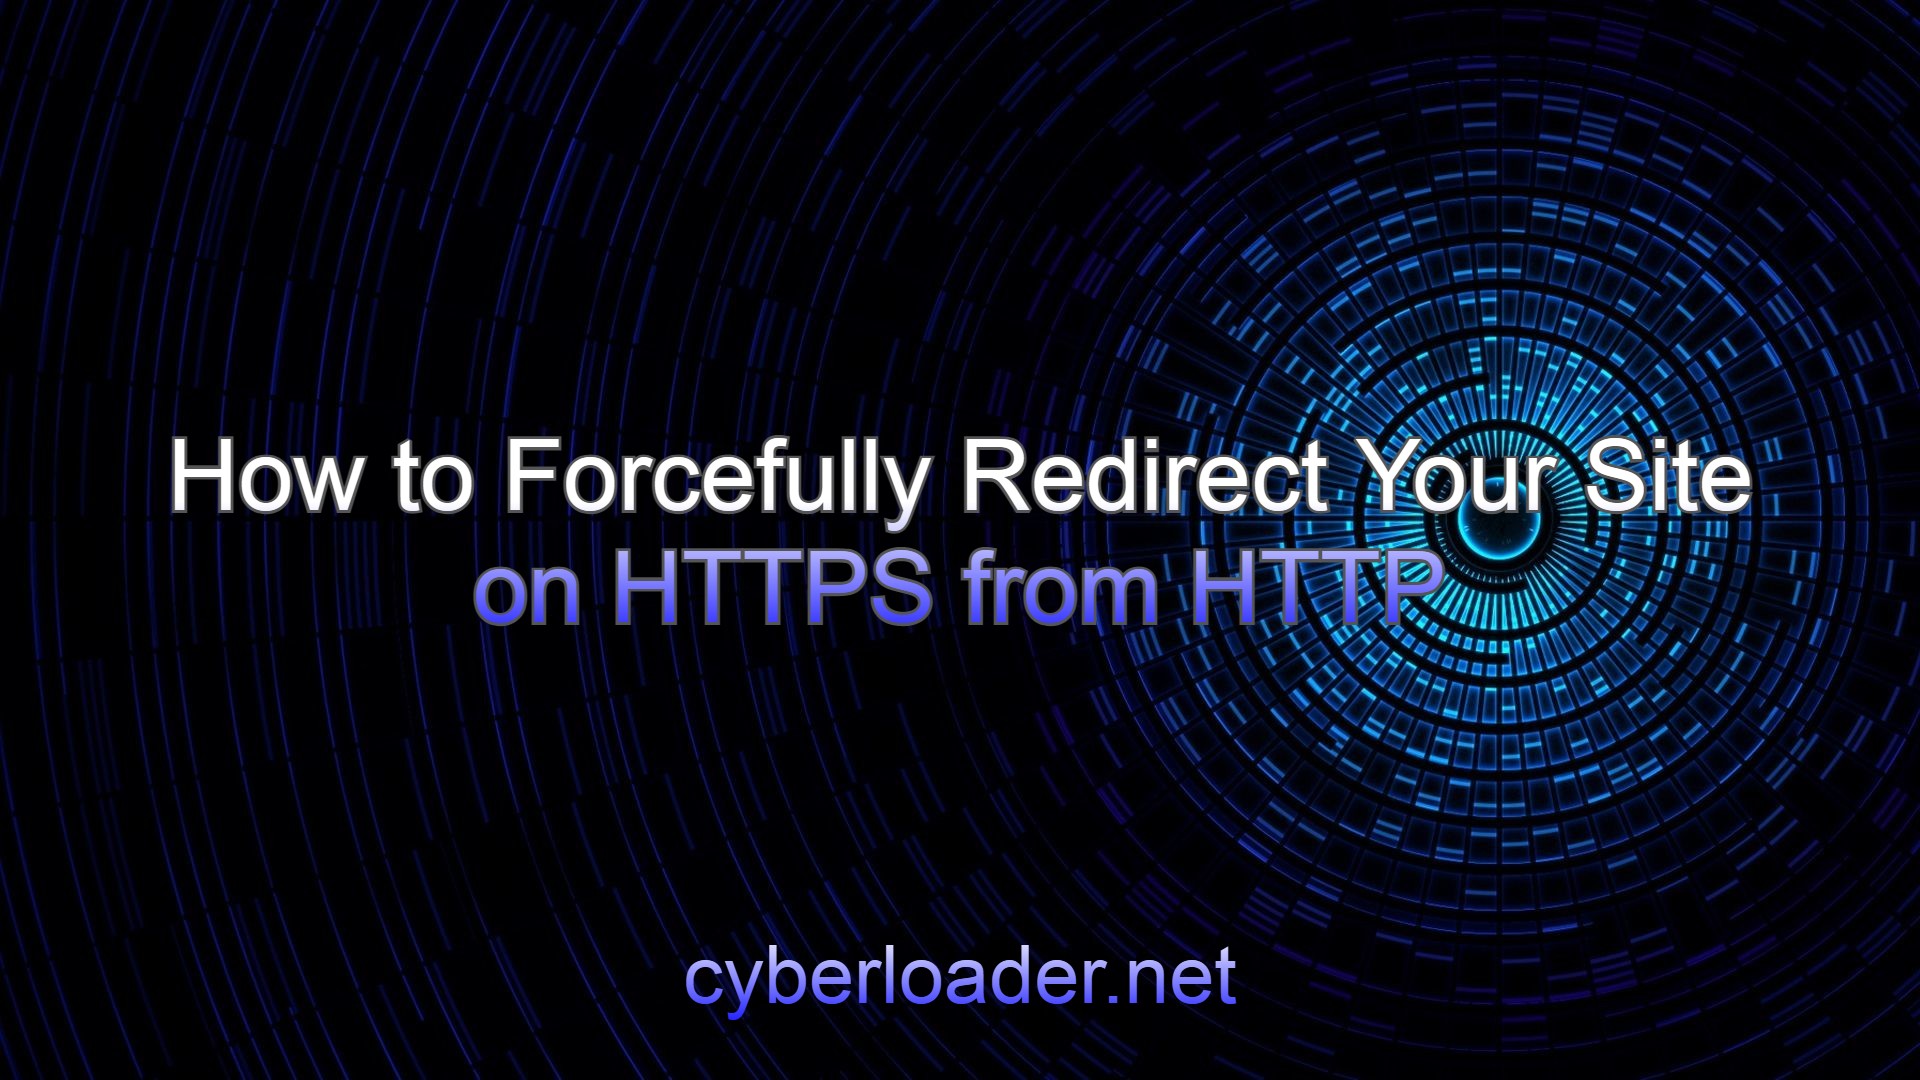 How to Forcefully Redirect Your Site on HTTPS from HTTP